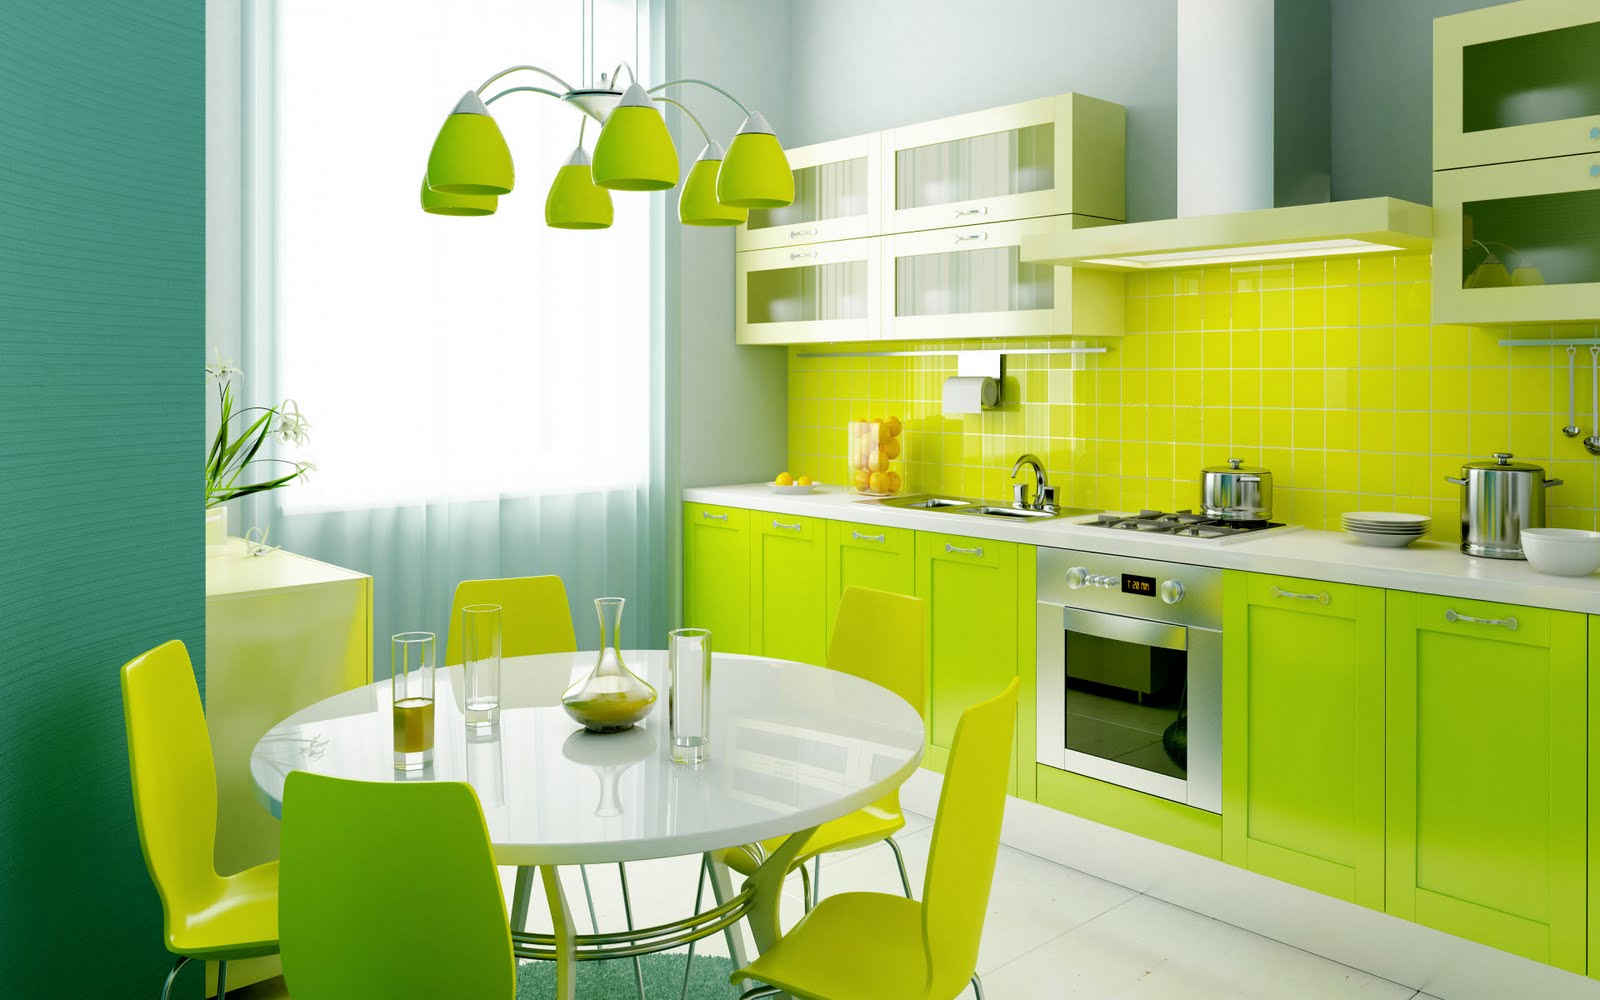 wonderful-green-kitchens-image-with-white-countertops-kitchen-and-light-over-bed-also-l-shaped-kitchen-ideas